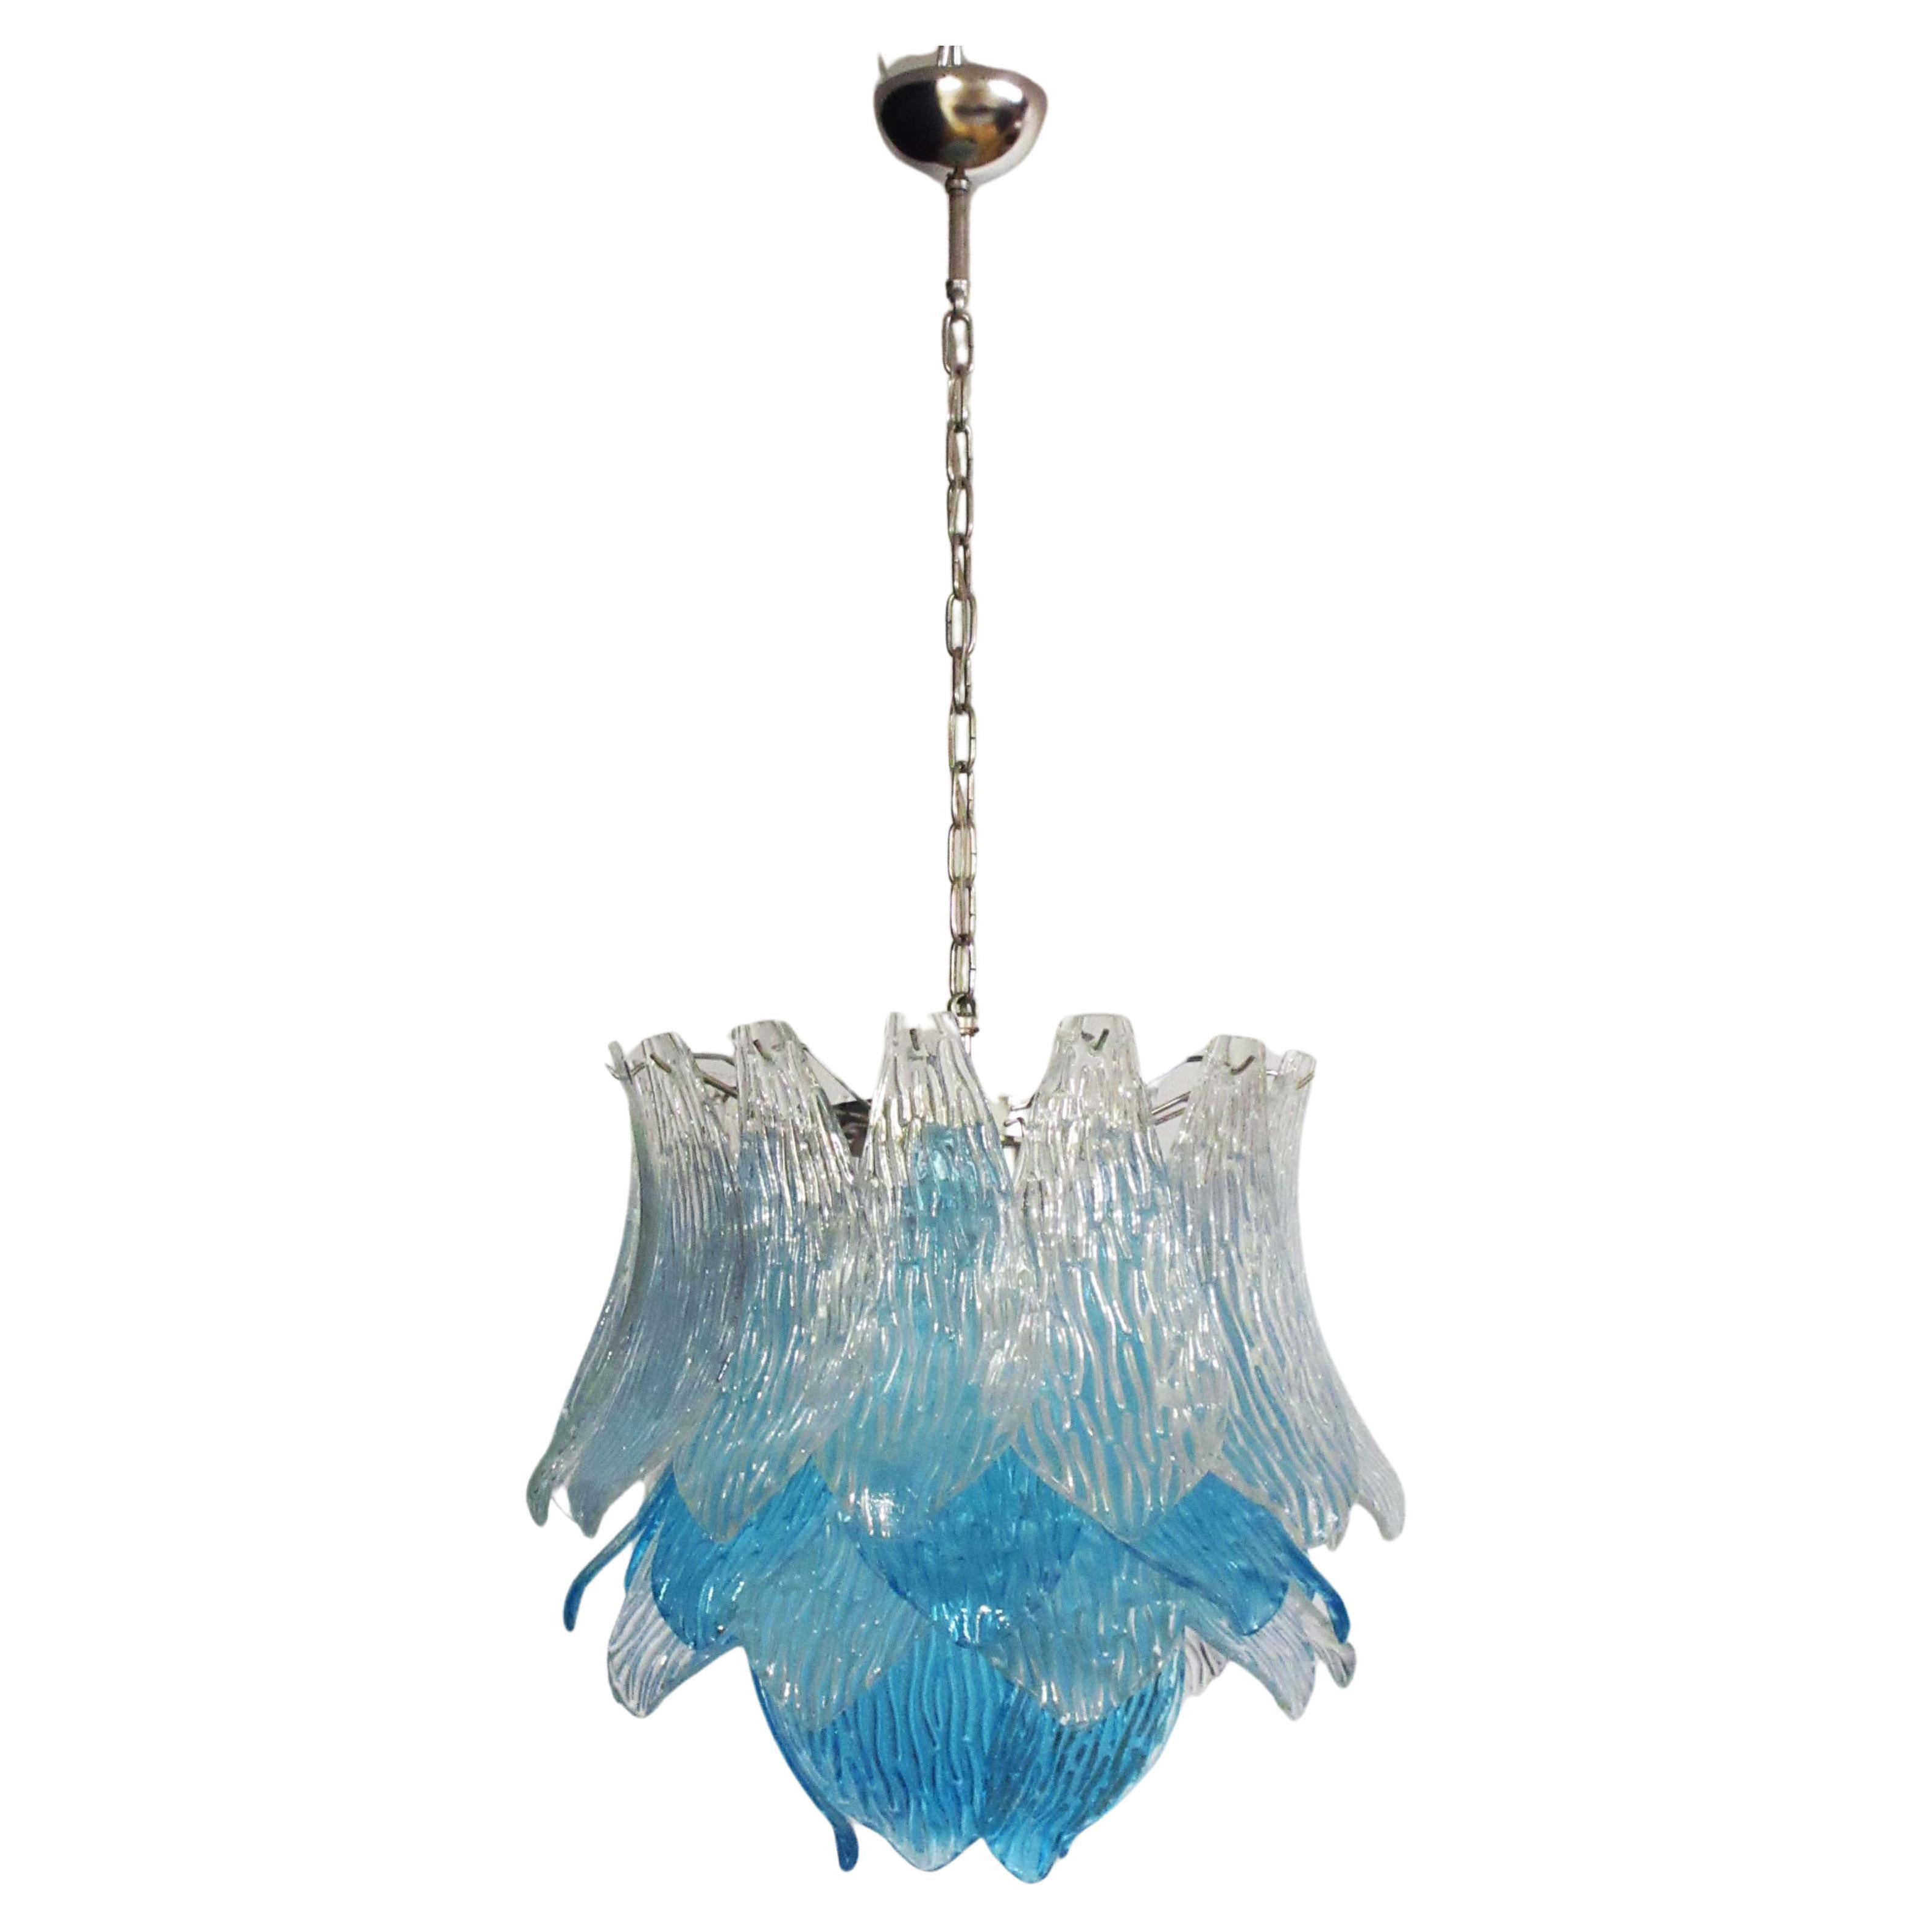 Italian vintage Murano Glass chandelier - 38 glasses - blue and trasparent